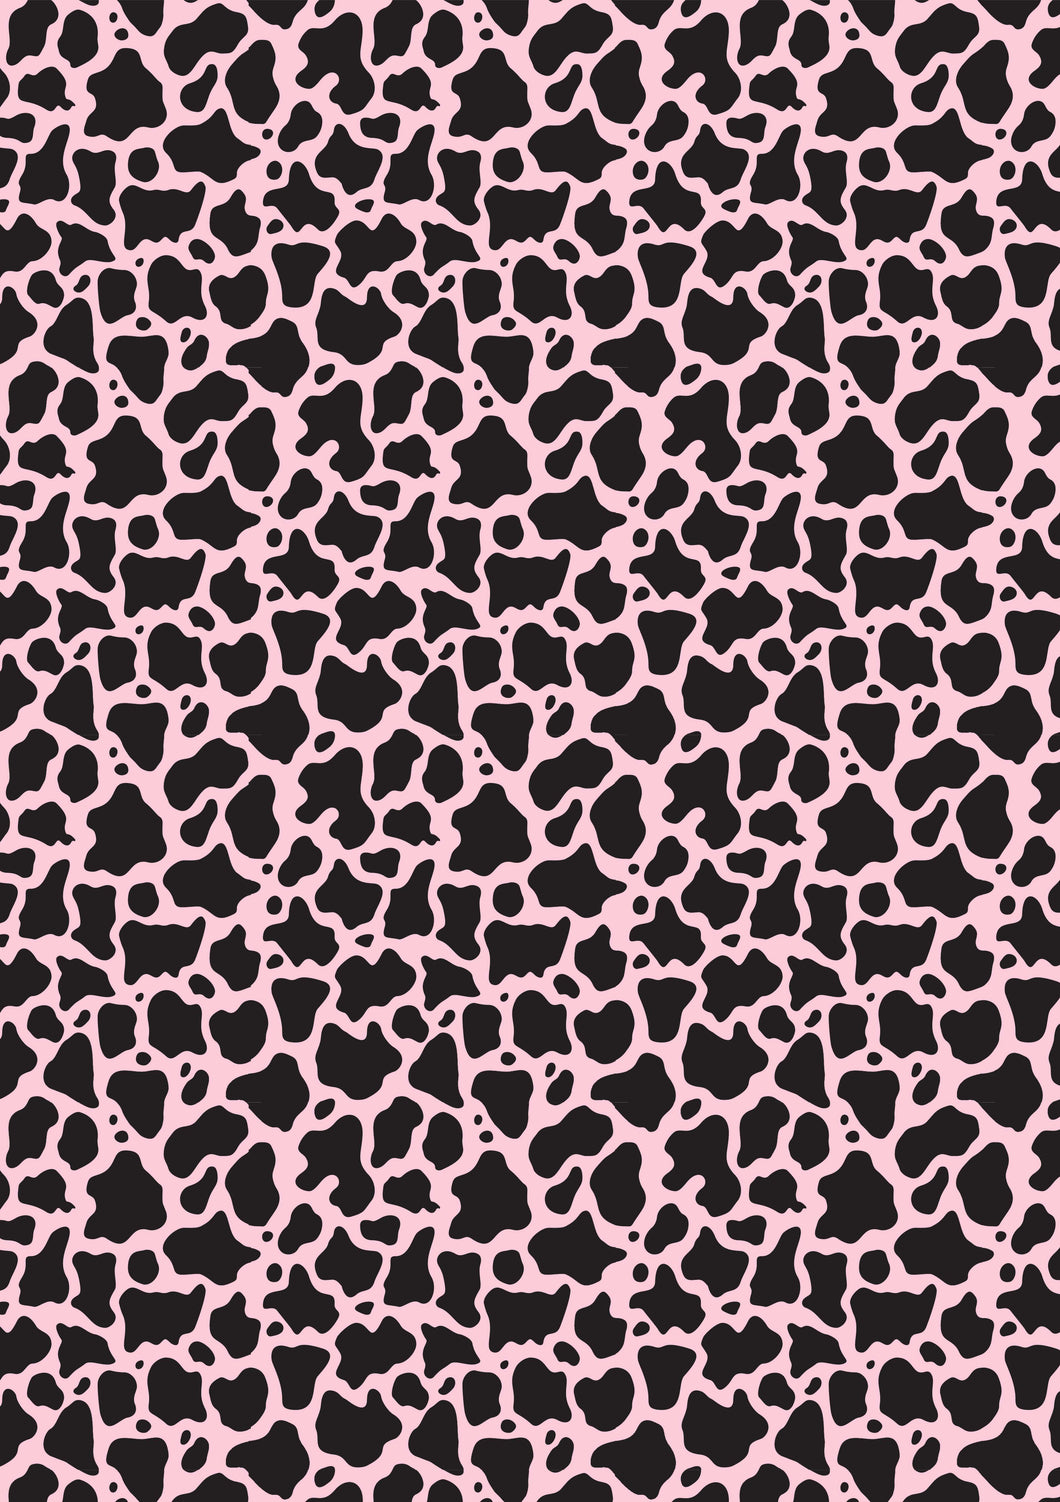 12 x 17 BRAND NEW Cow Print Pink Small Pattern HTV Sheet - Cow